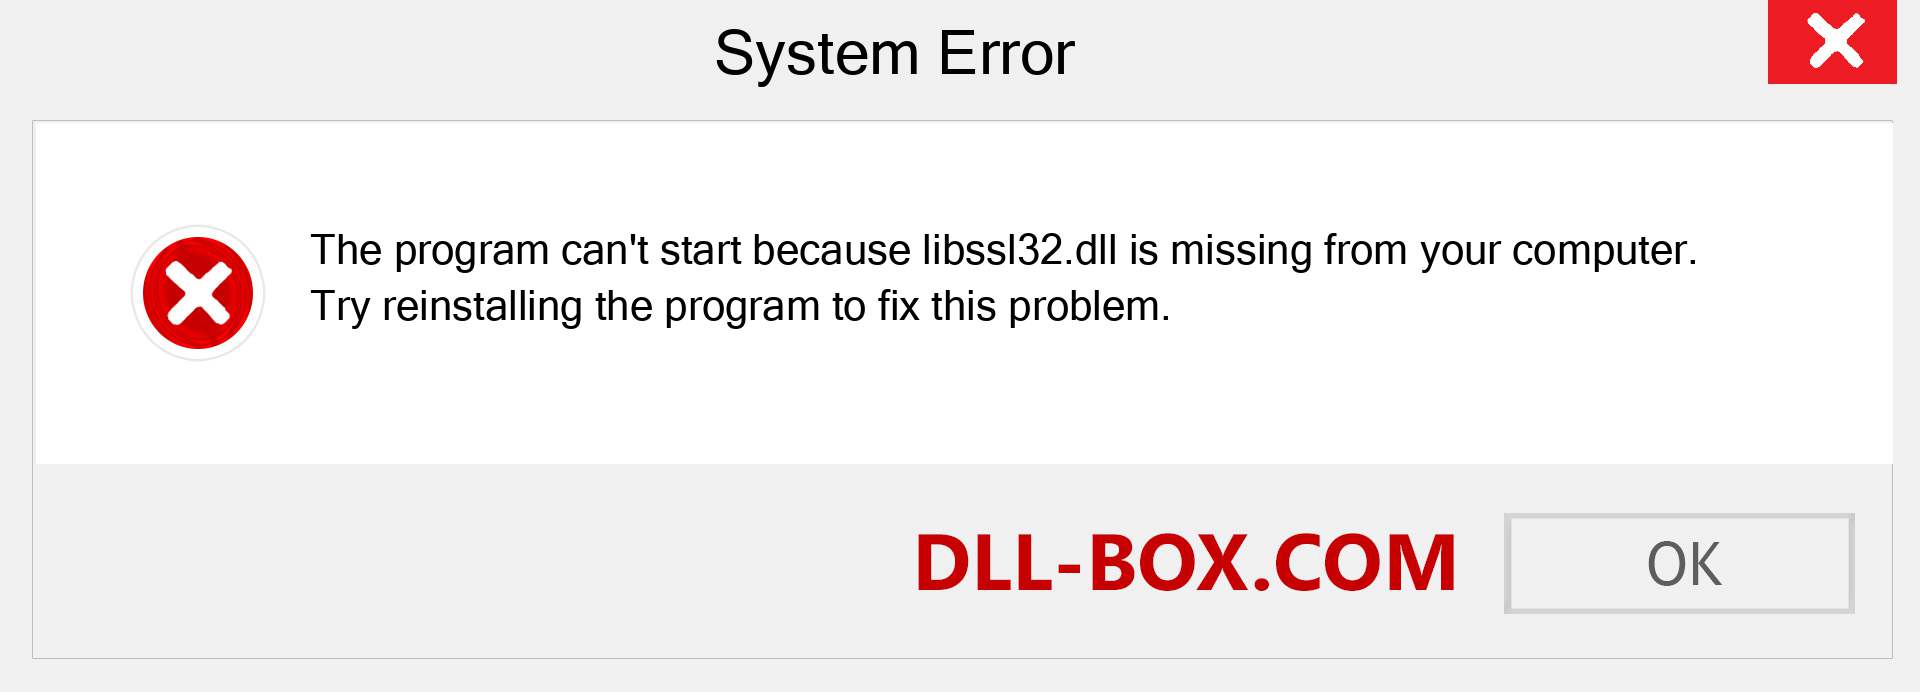  libssl32.dll file is missing?. Download for Windows 7, 8, 10 - Fix  libssl32 dll Missing Error on Windows, photos, images